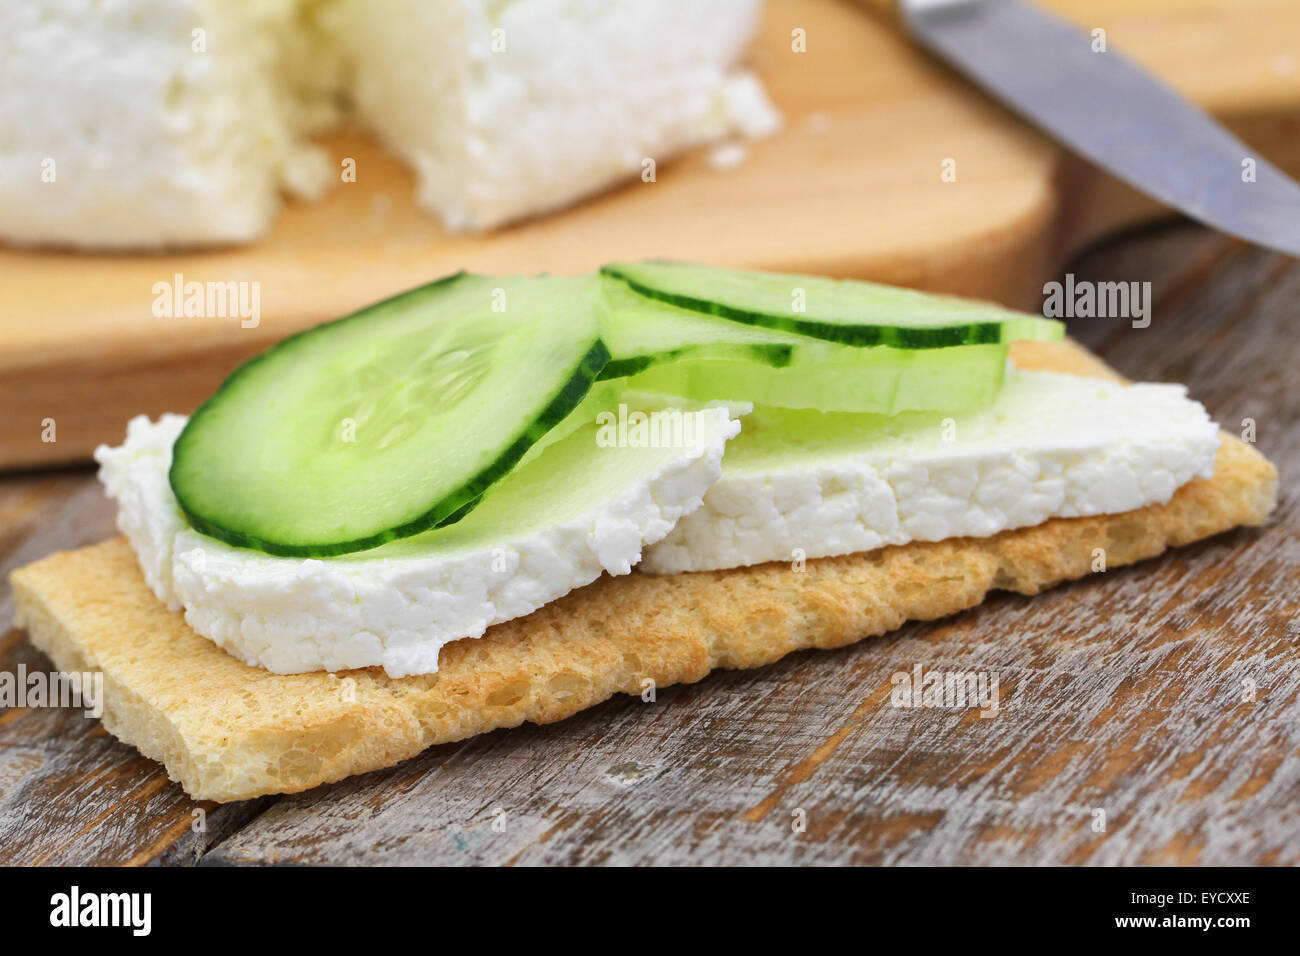 Crisp bread with curd cheese and cucumber Stock Photo